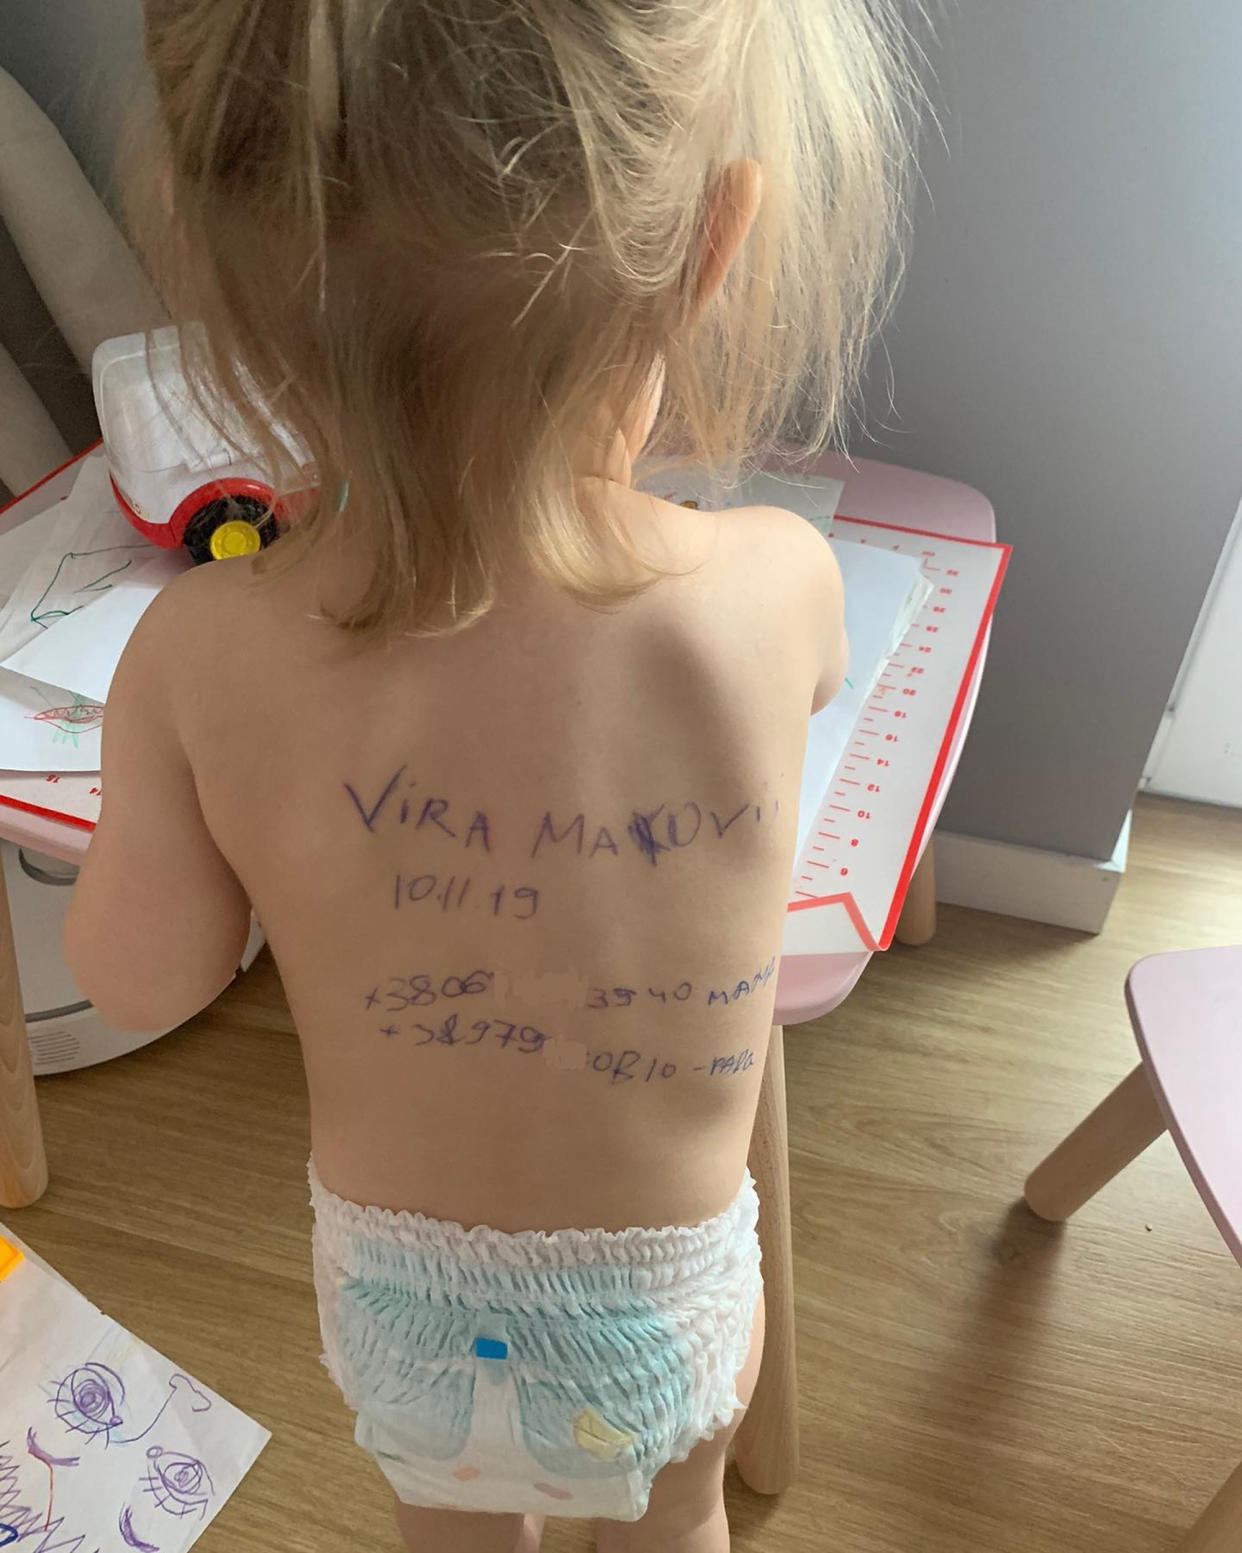 Sasha's daughter, pictured with her grandparent's contact information written on her back. (Courtesy Sasha)